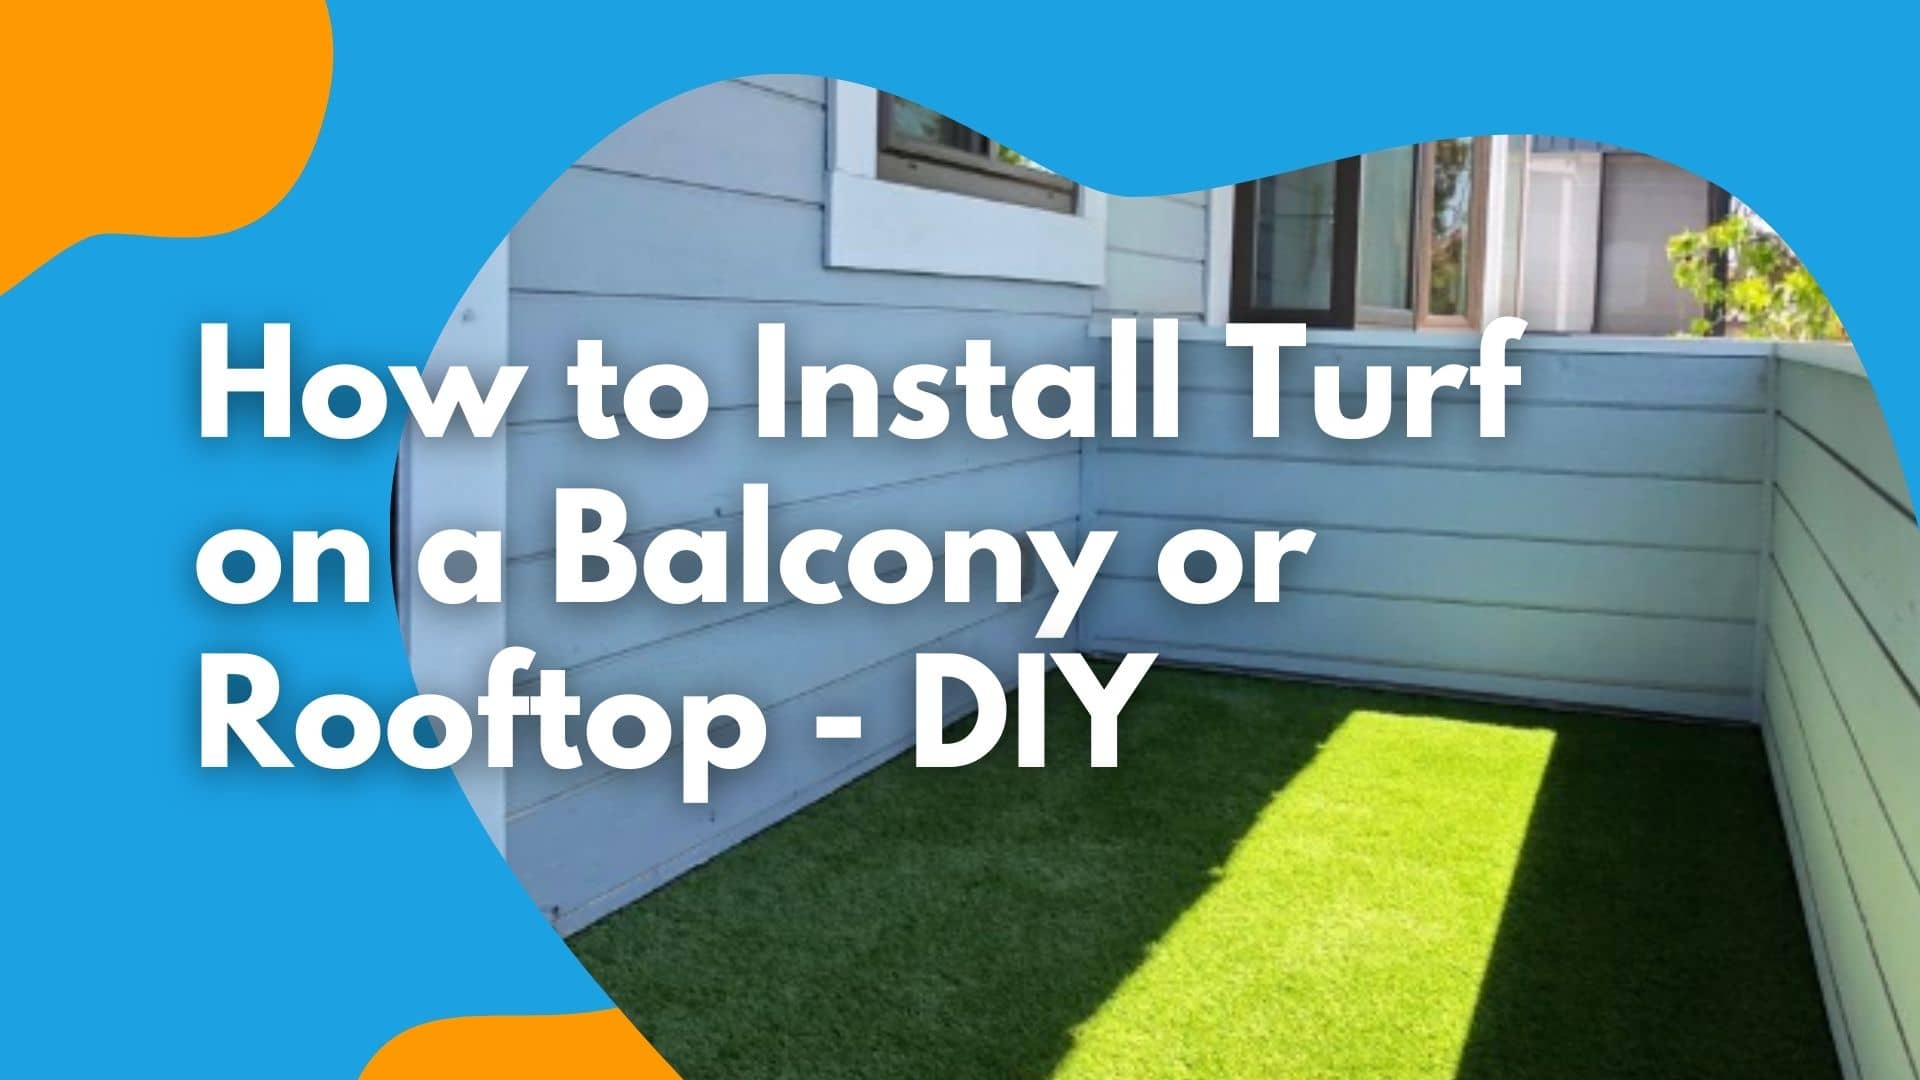 How to install turf on a balcony or rooftop DIY